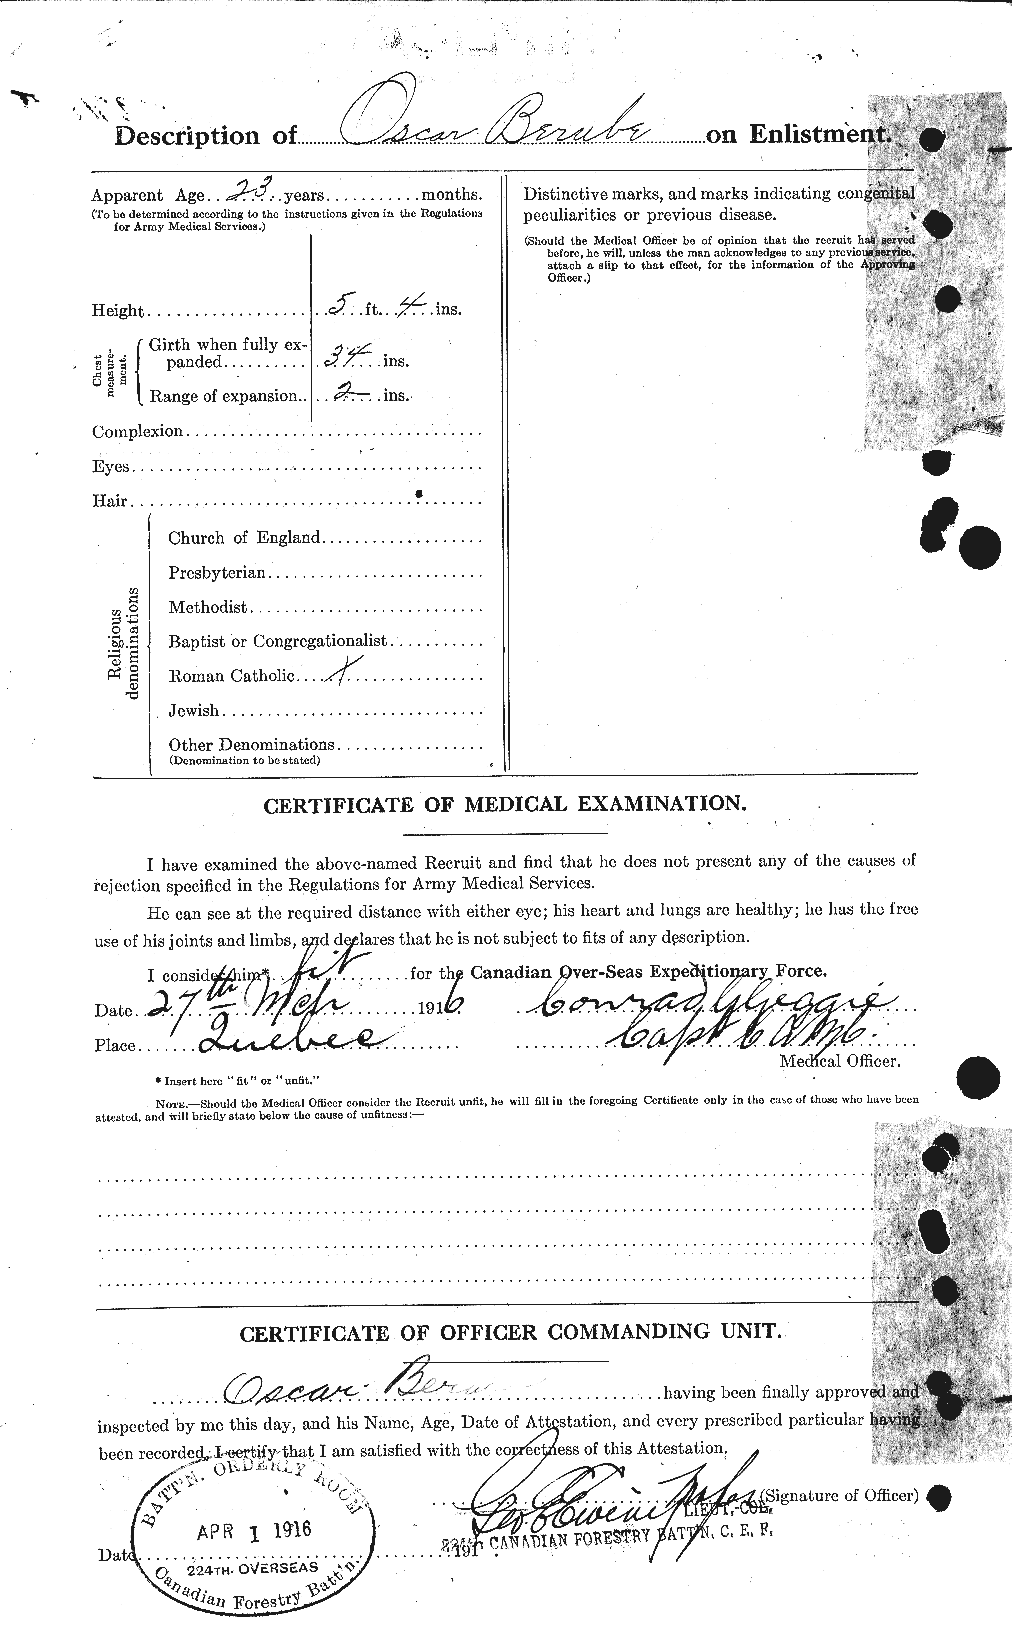 Personnel Records of the First World War - CEF 240049b